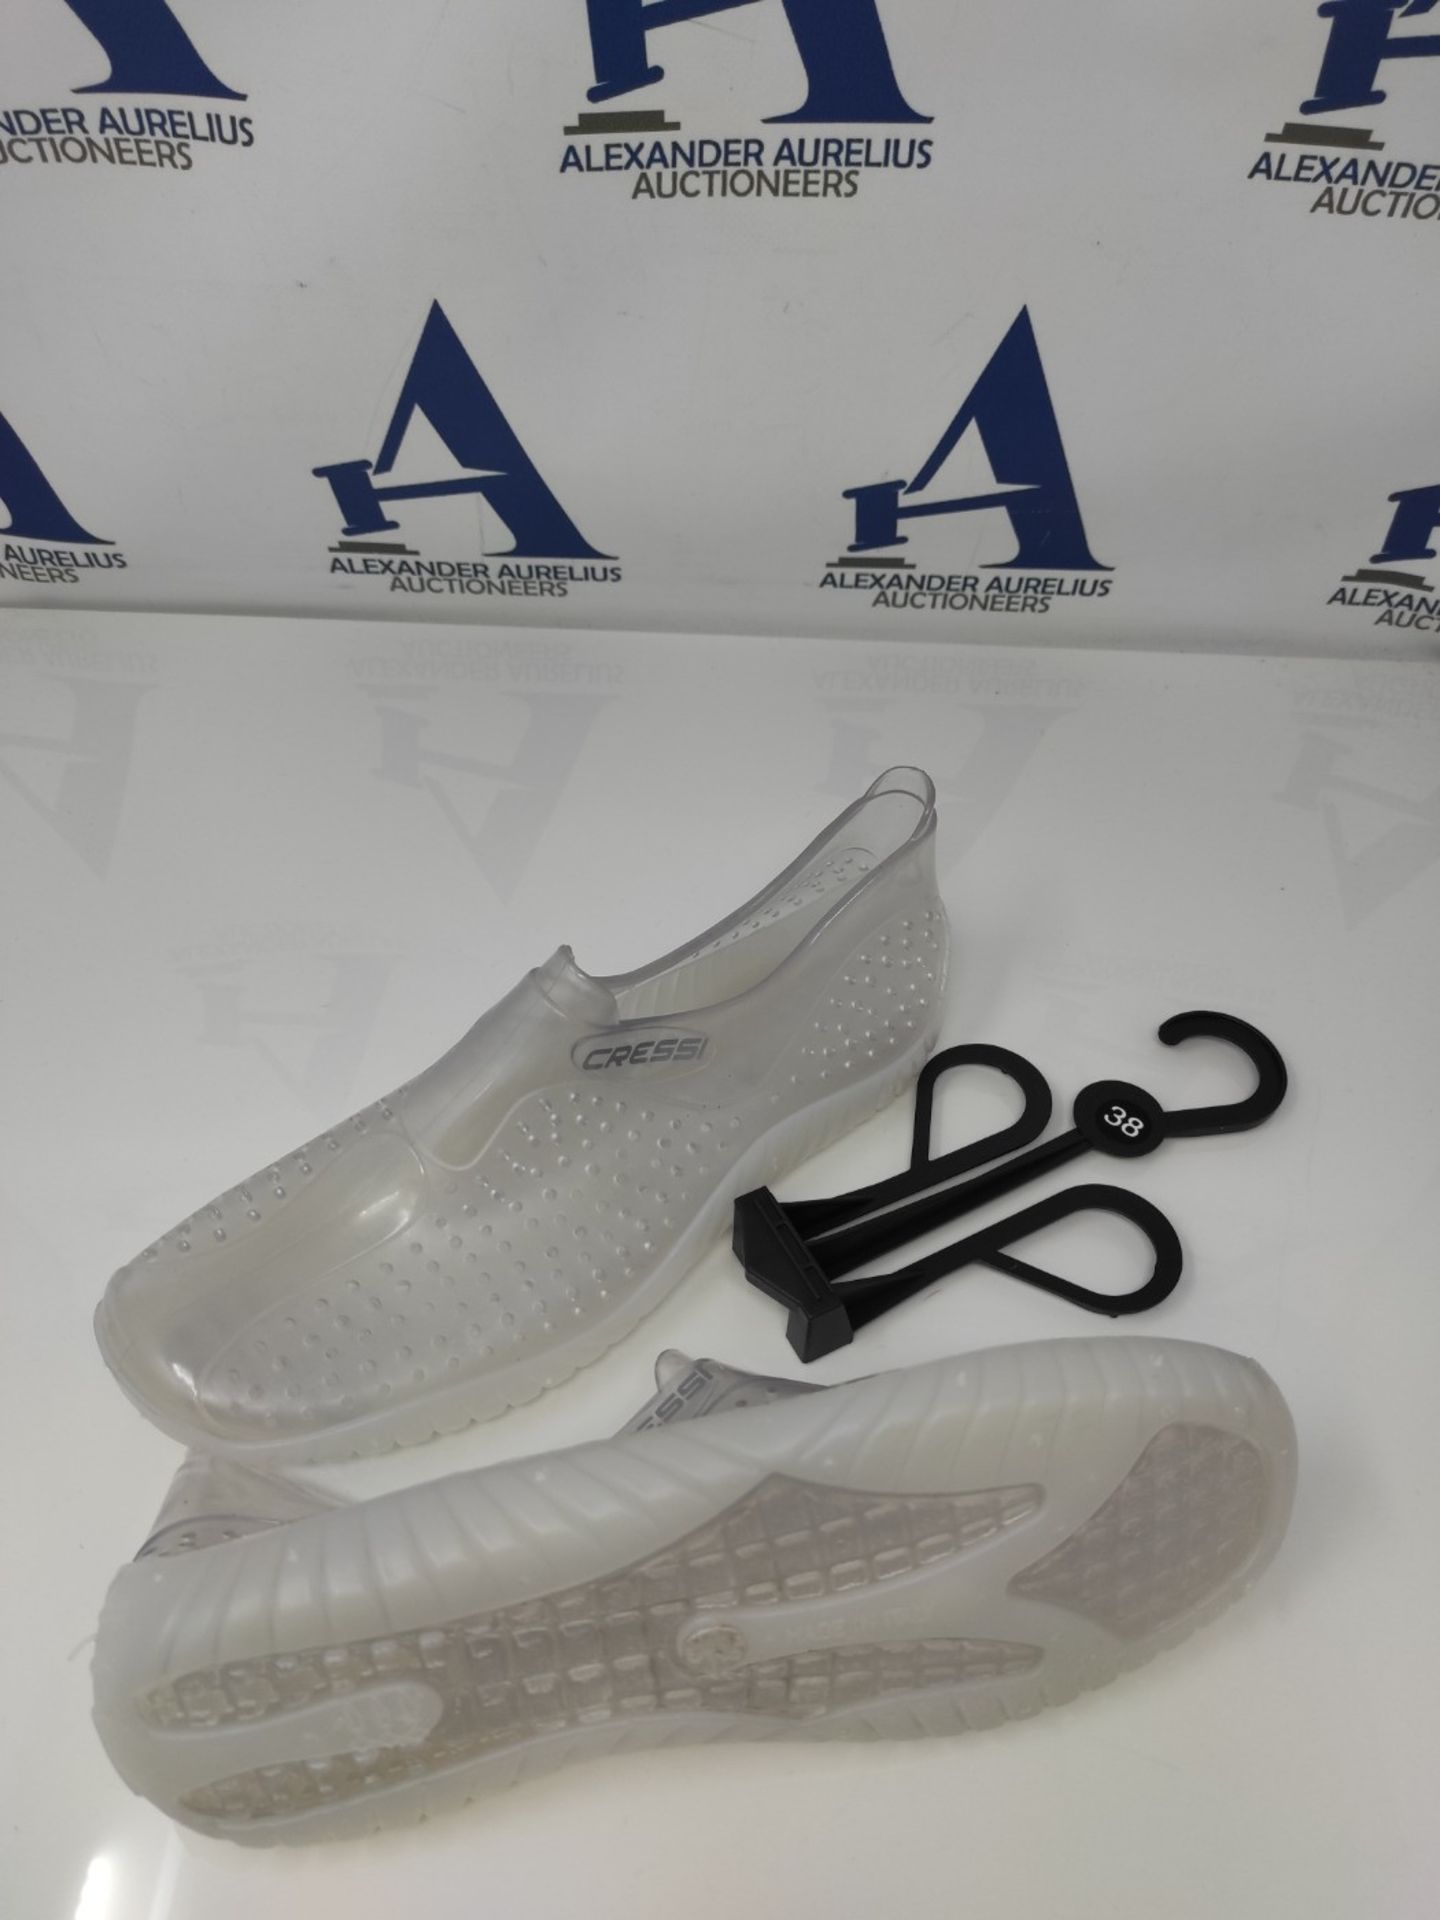 Cressi Water Shoes, Sporty Shoes for Aquatic/Beach Use for Adults, Boys and Children, - Image 2 of 3